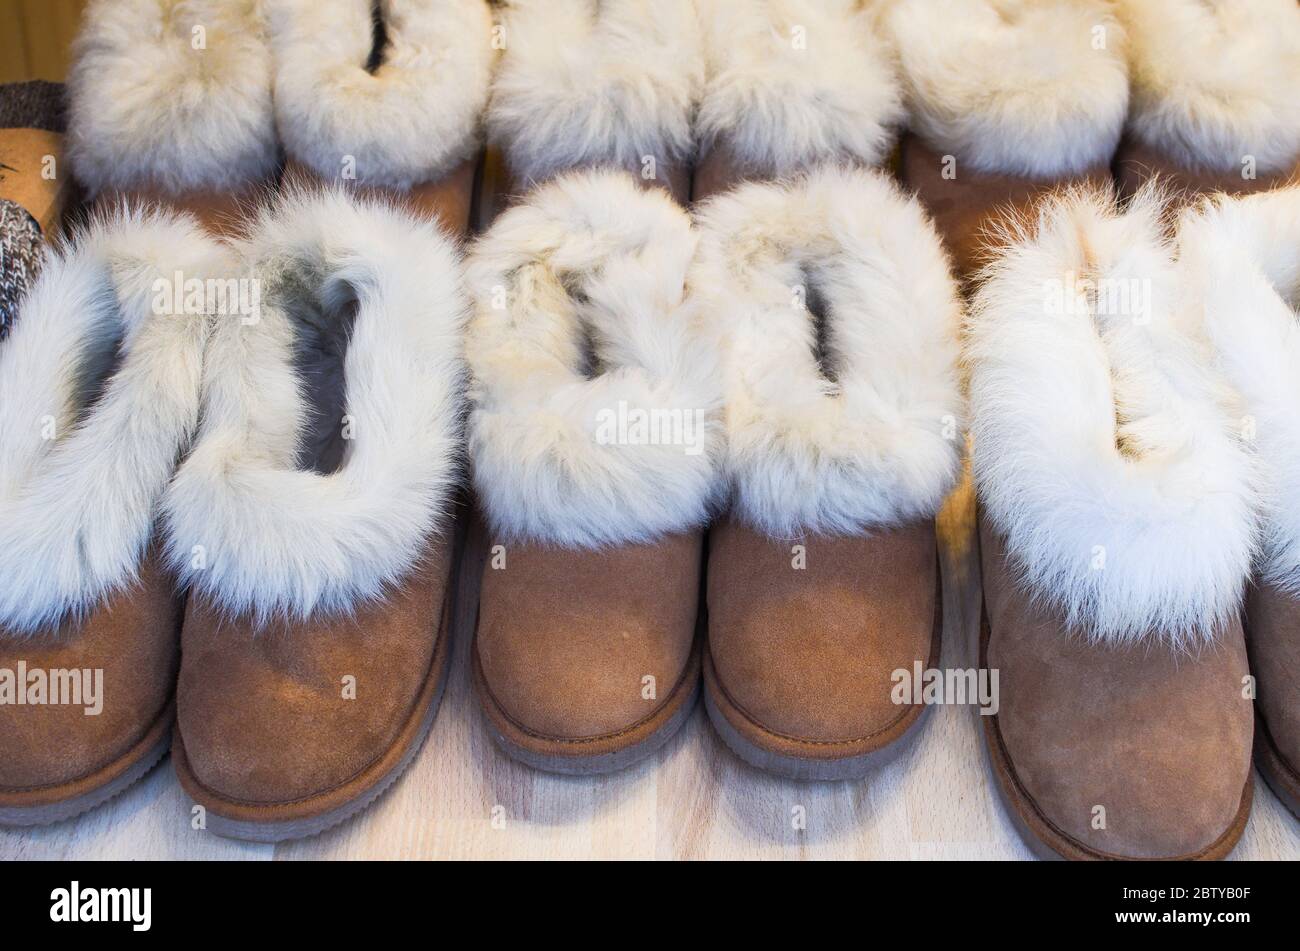 natural shoe store uggs